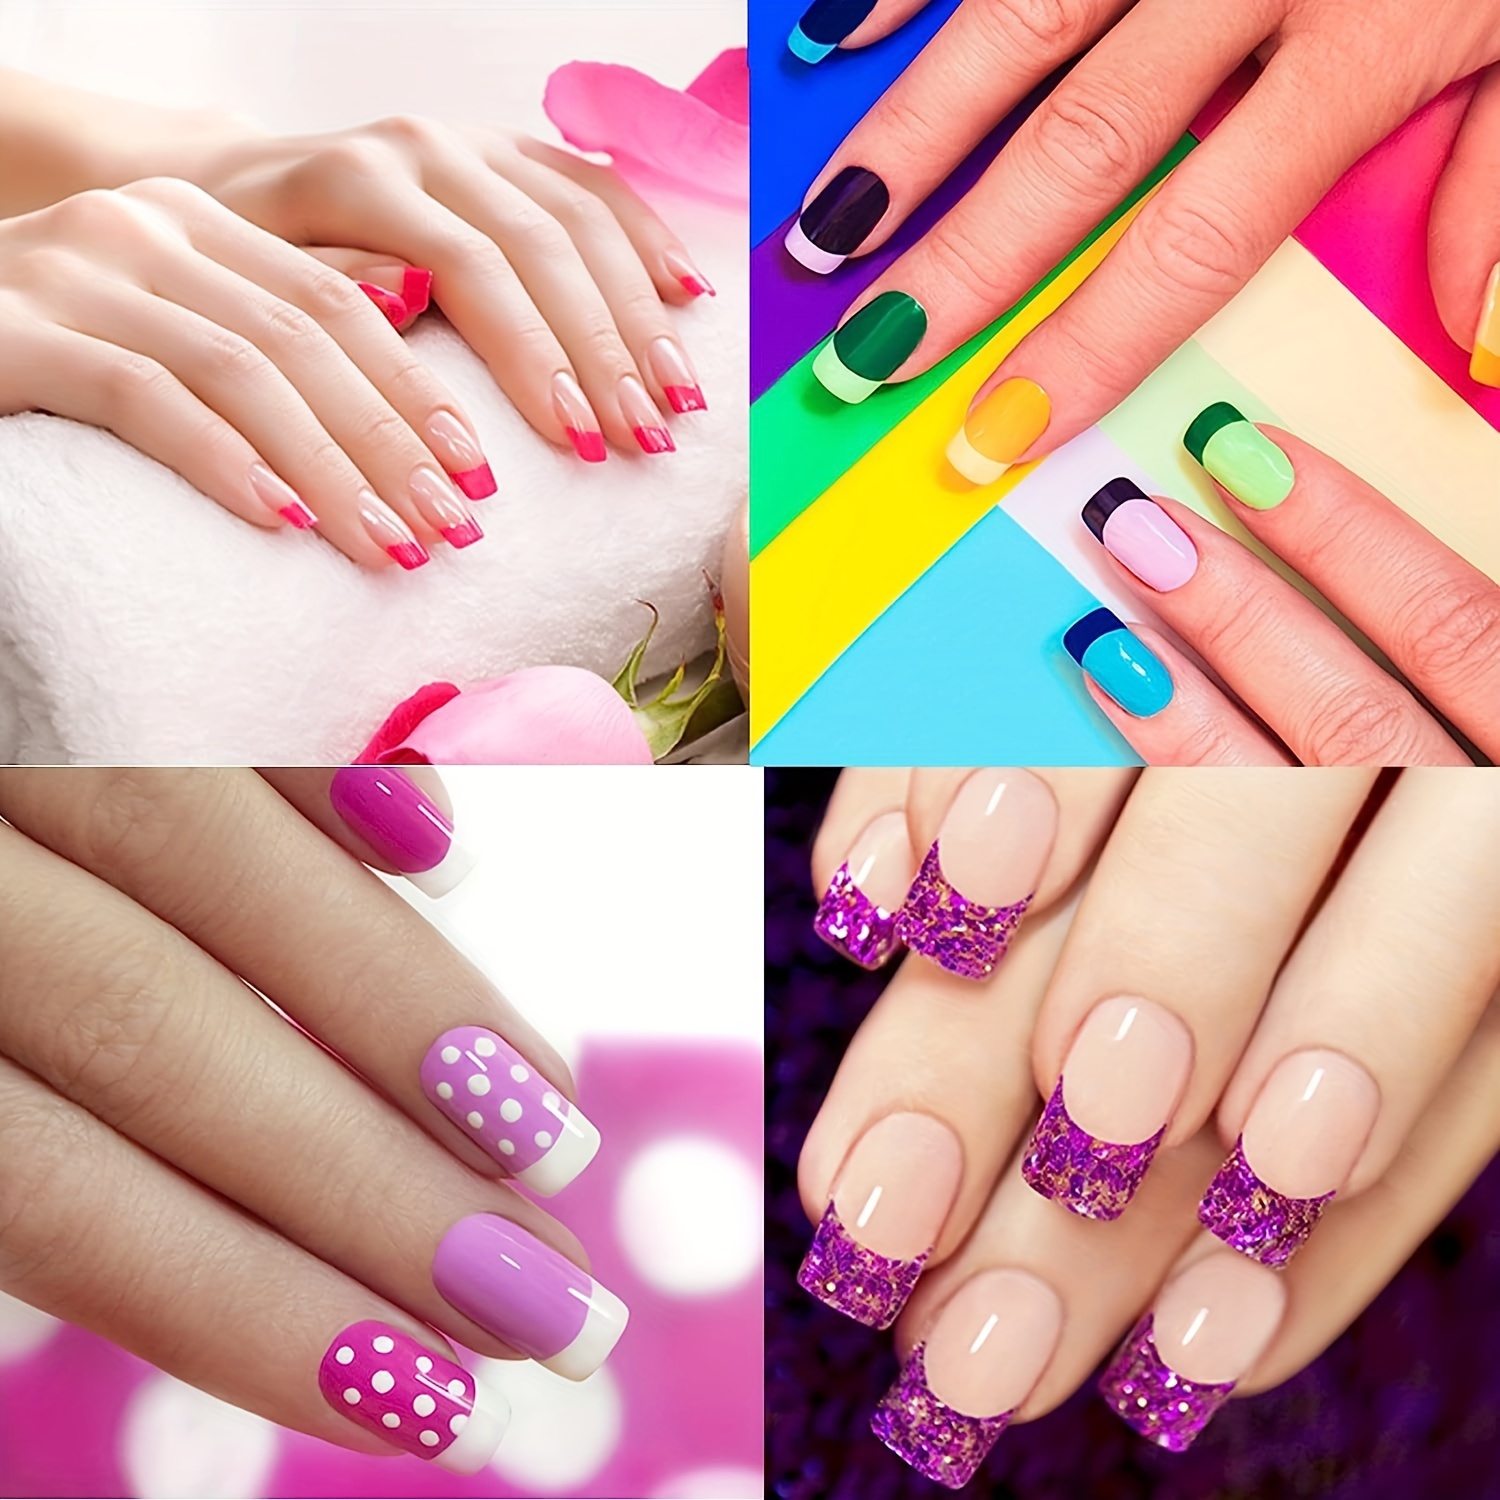 3 Easy Nail Art Ideas Without Any Tools!